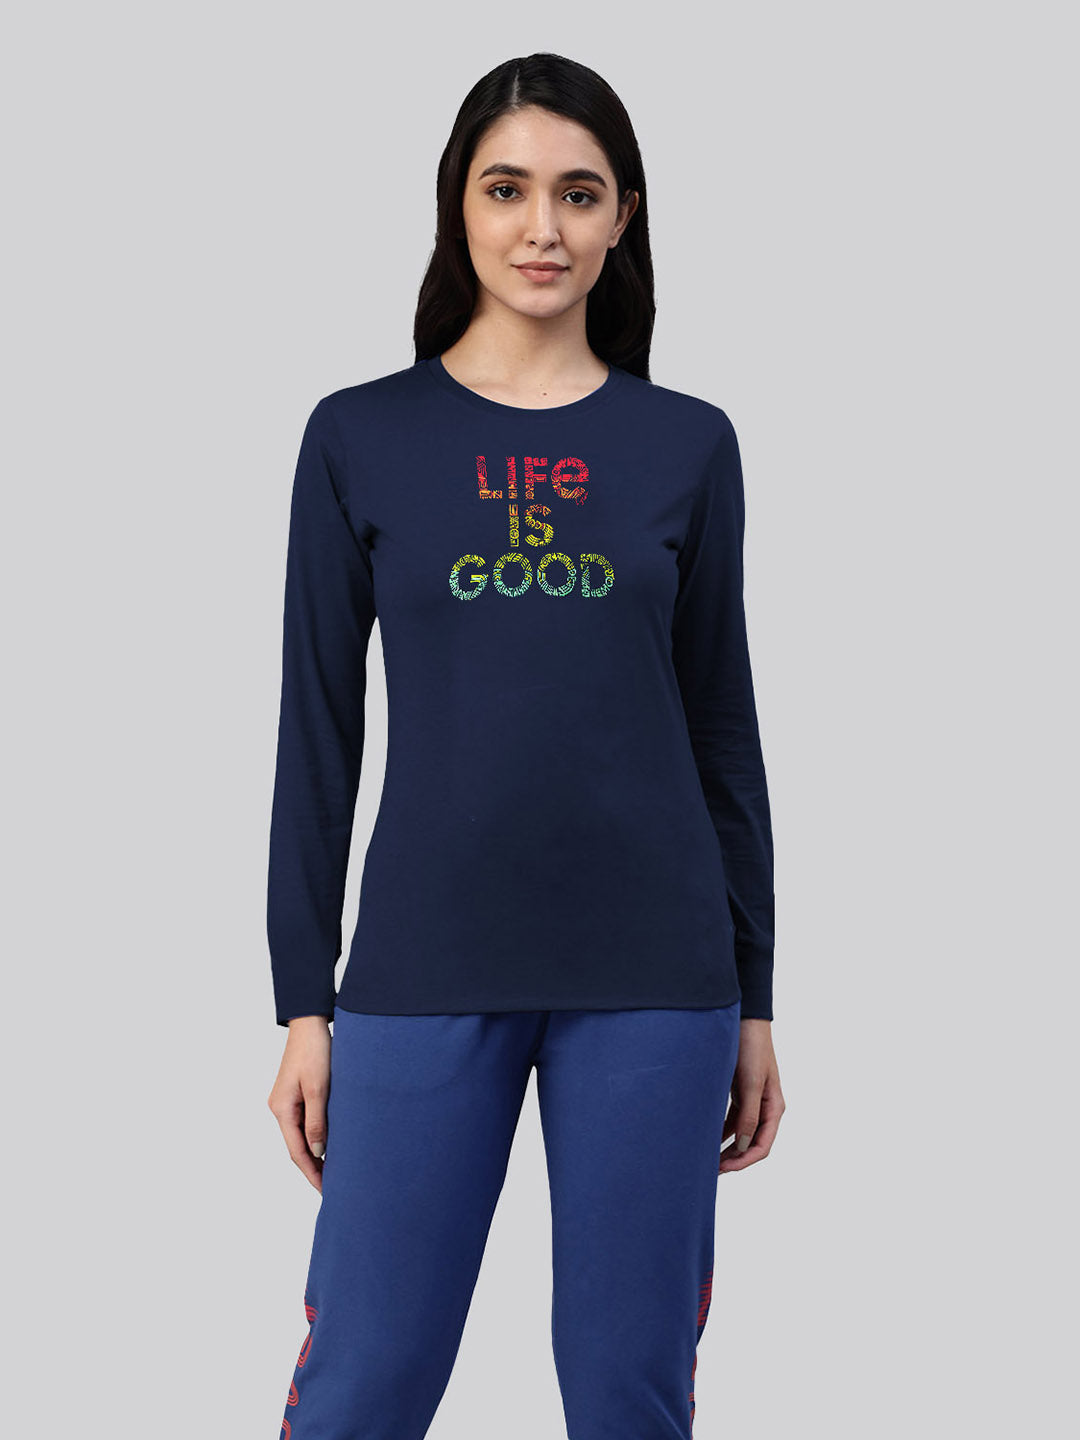 Navy printed blue round neck full sleeve t-shirt for ladies